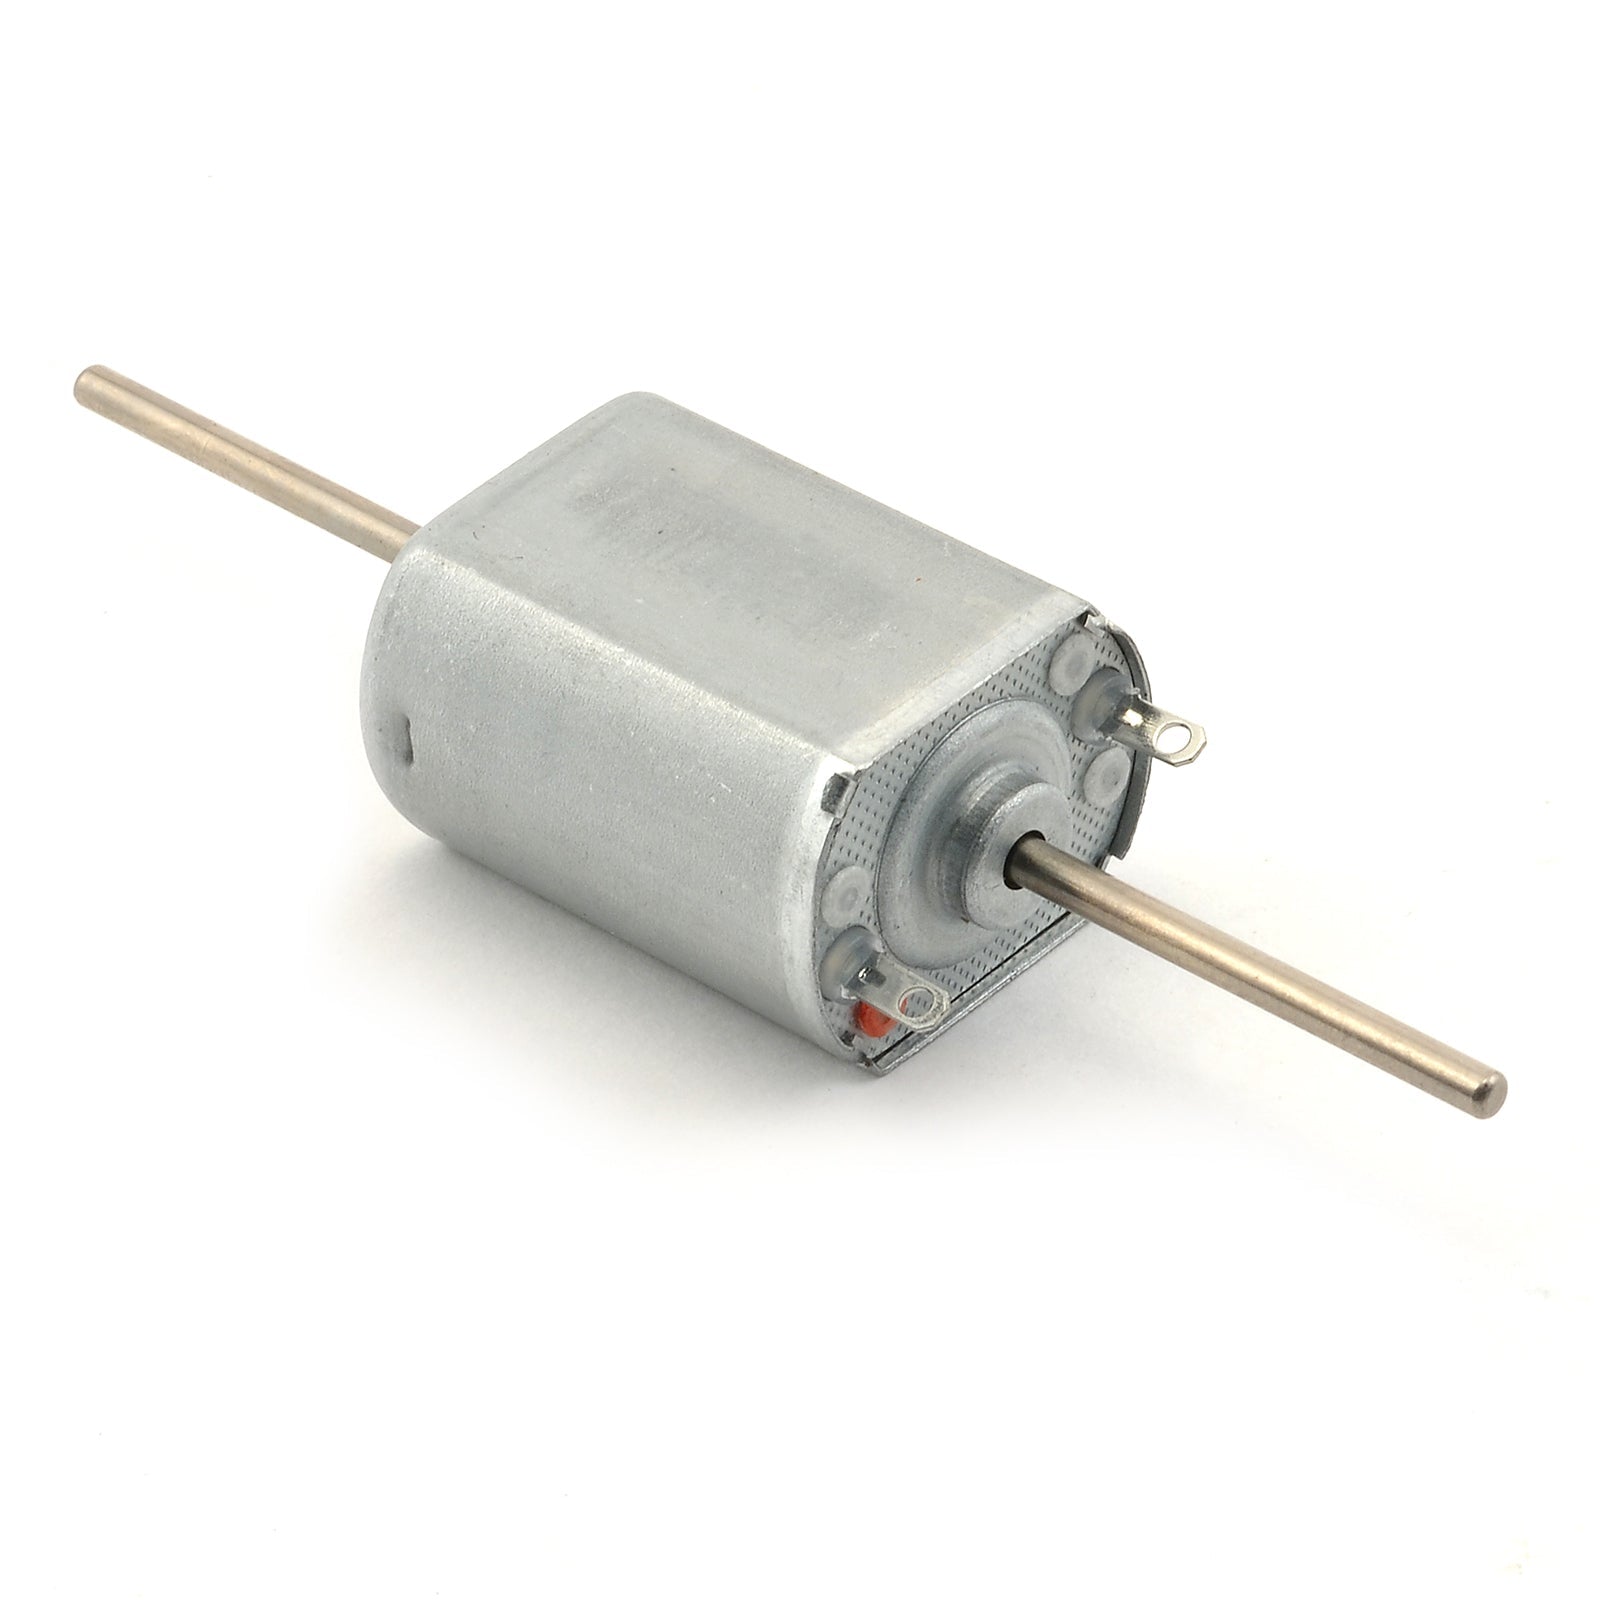 Flat Can Motor, Style 2025, 12v - Micro - Mark Electrical Motors